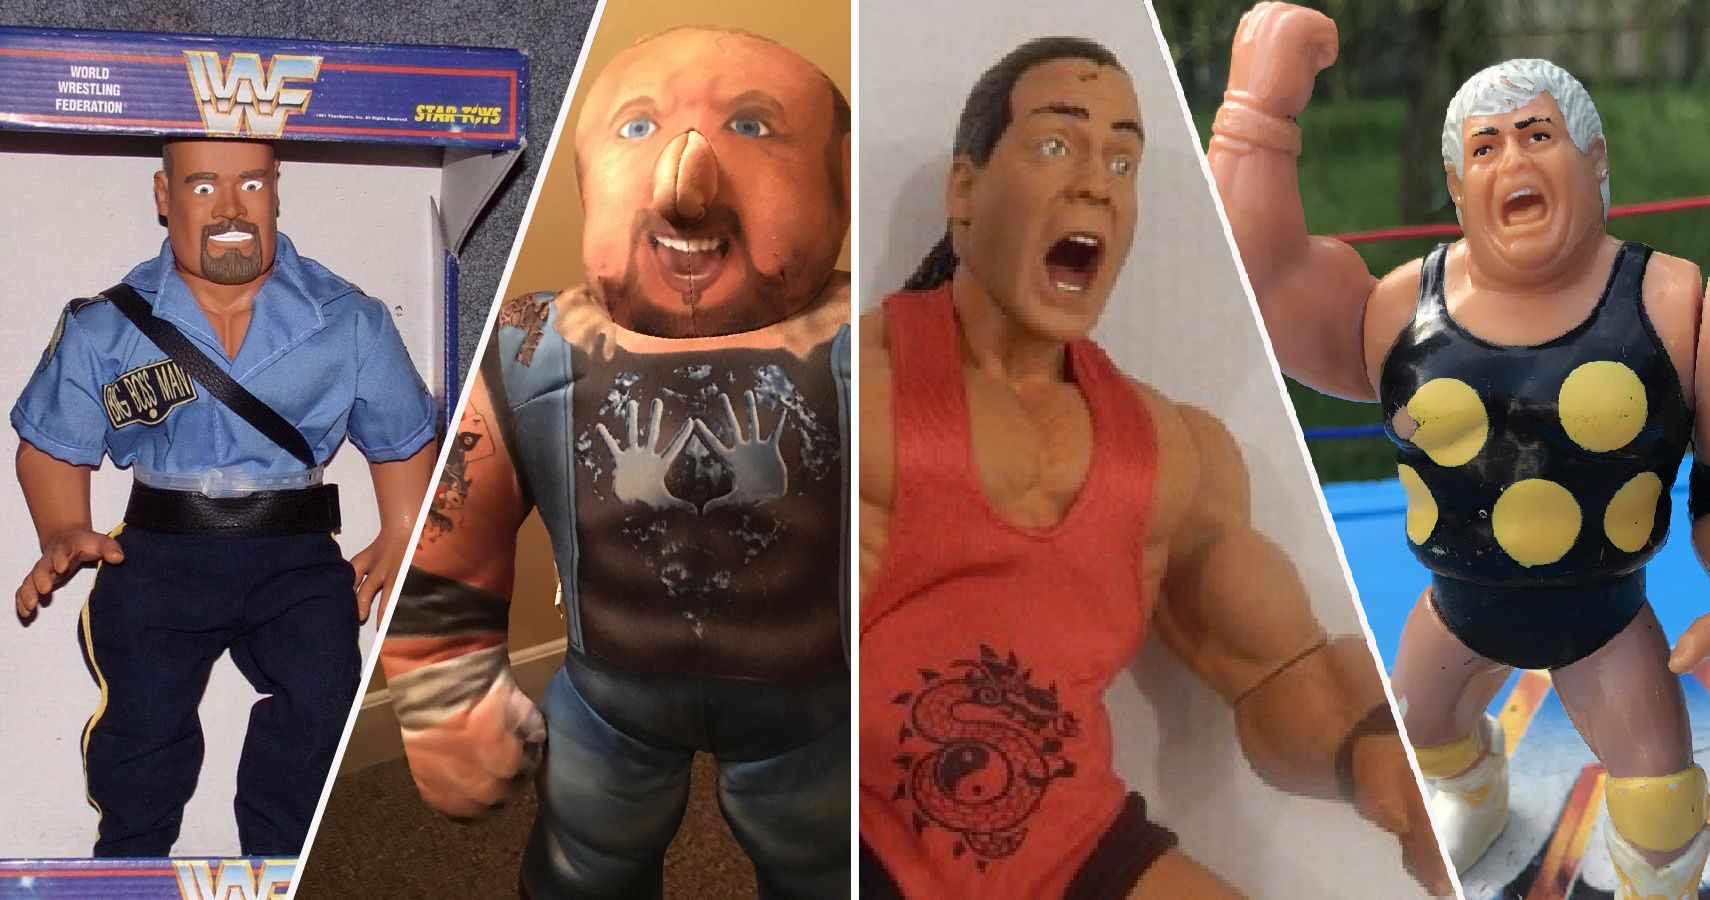 The 15 Rarest (And Most Expensive) WWE Action Figures